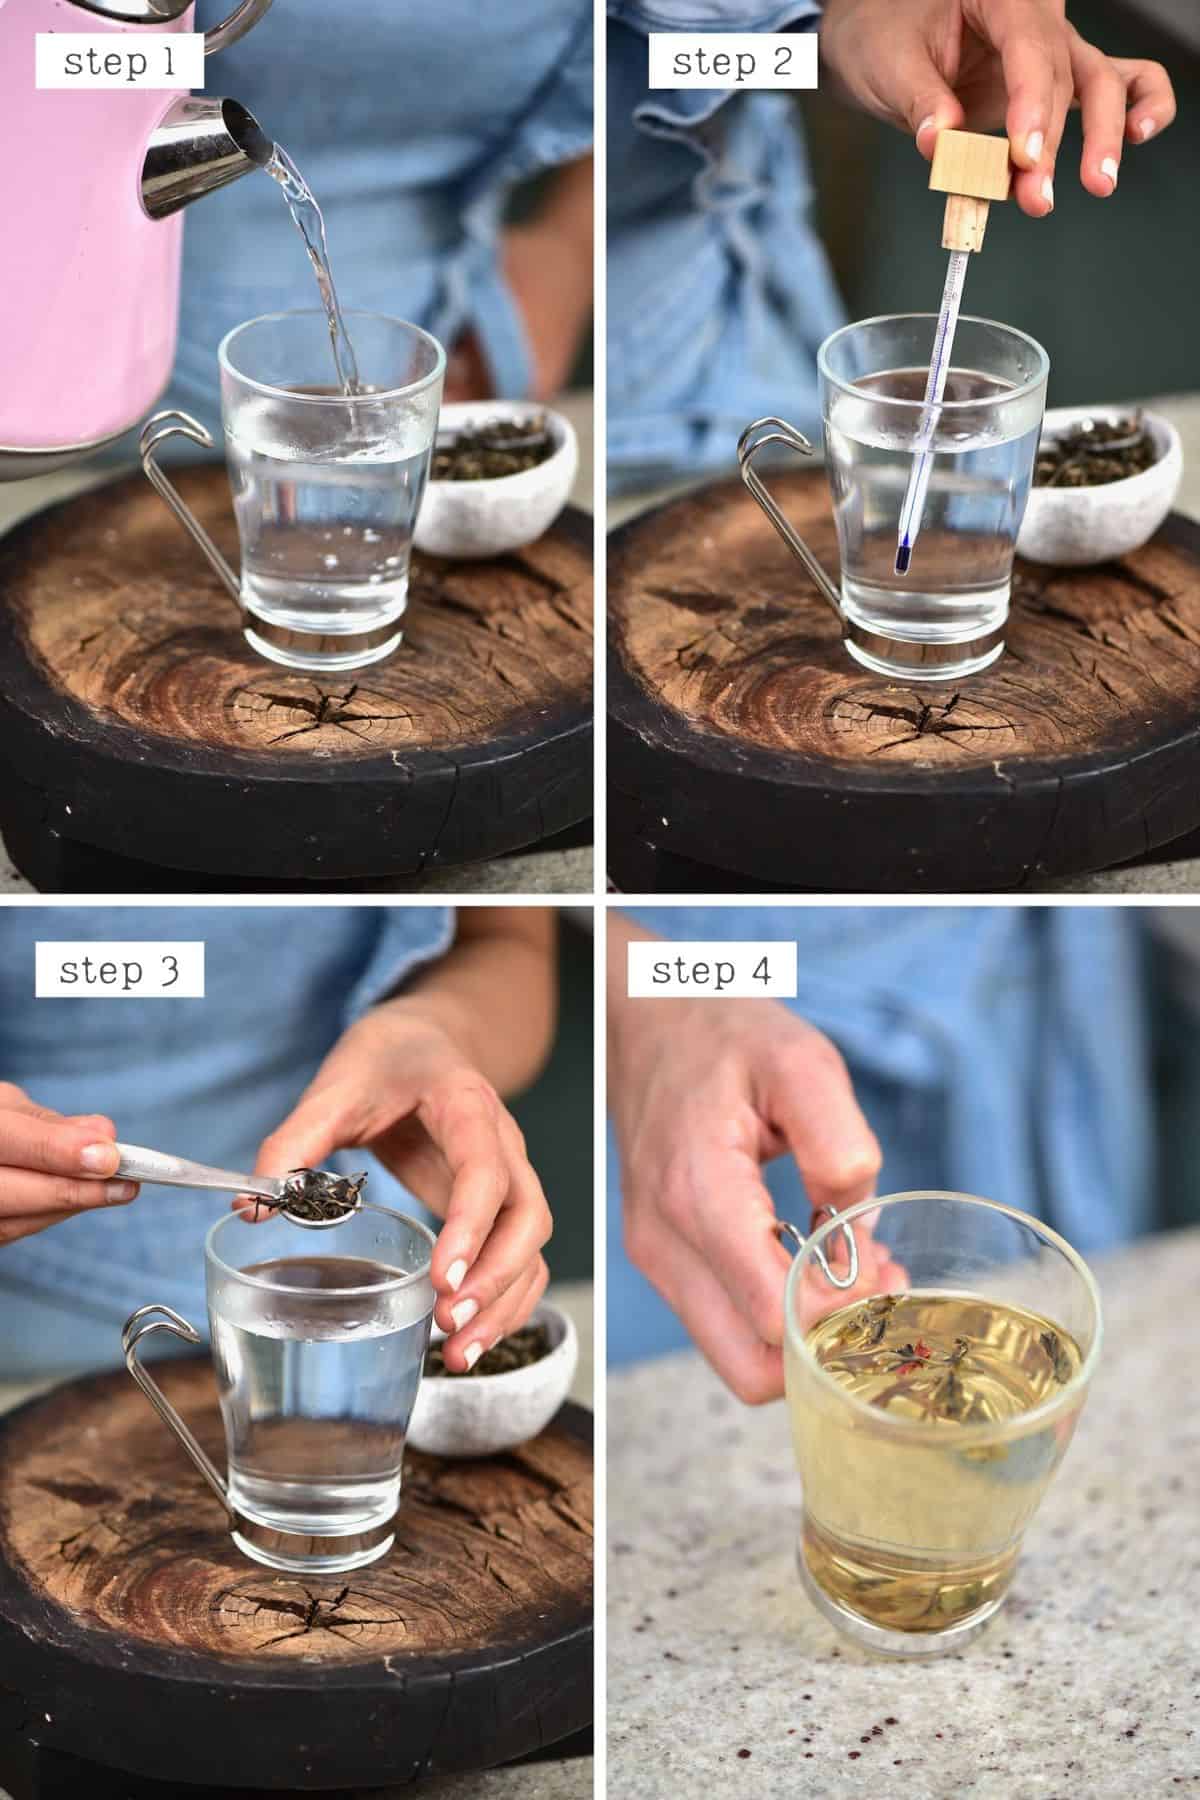 How to Make Green Tea (with no bitterness!) - Alphafoodie